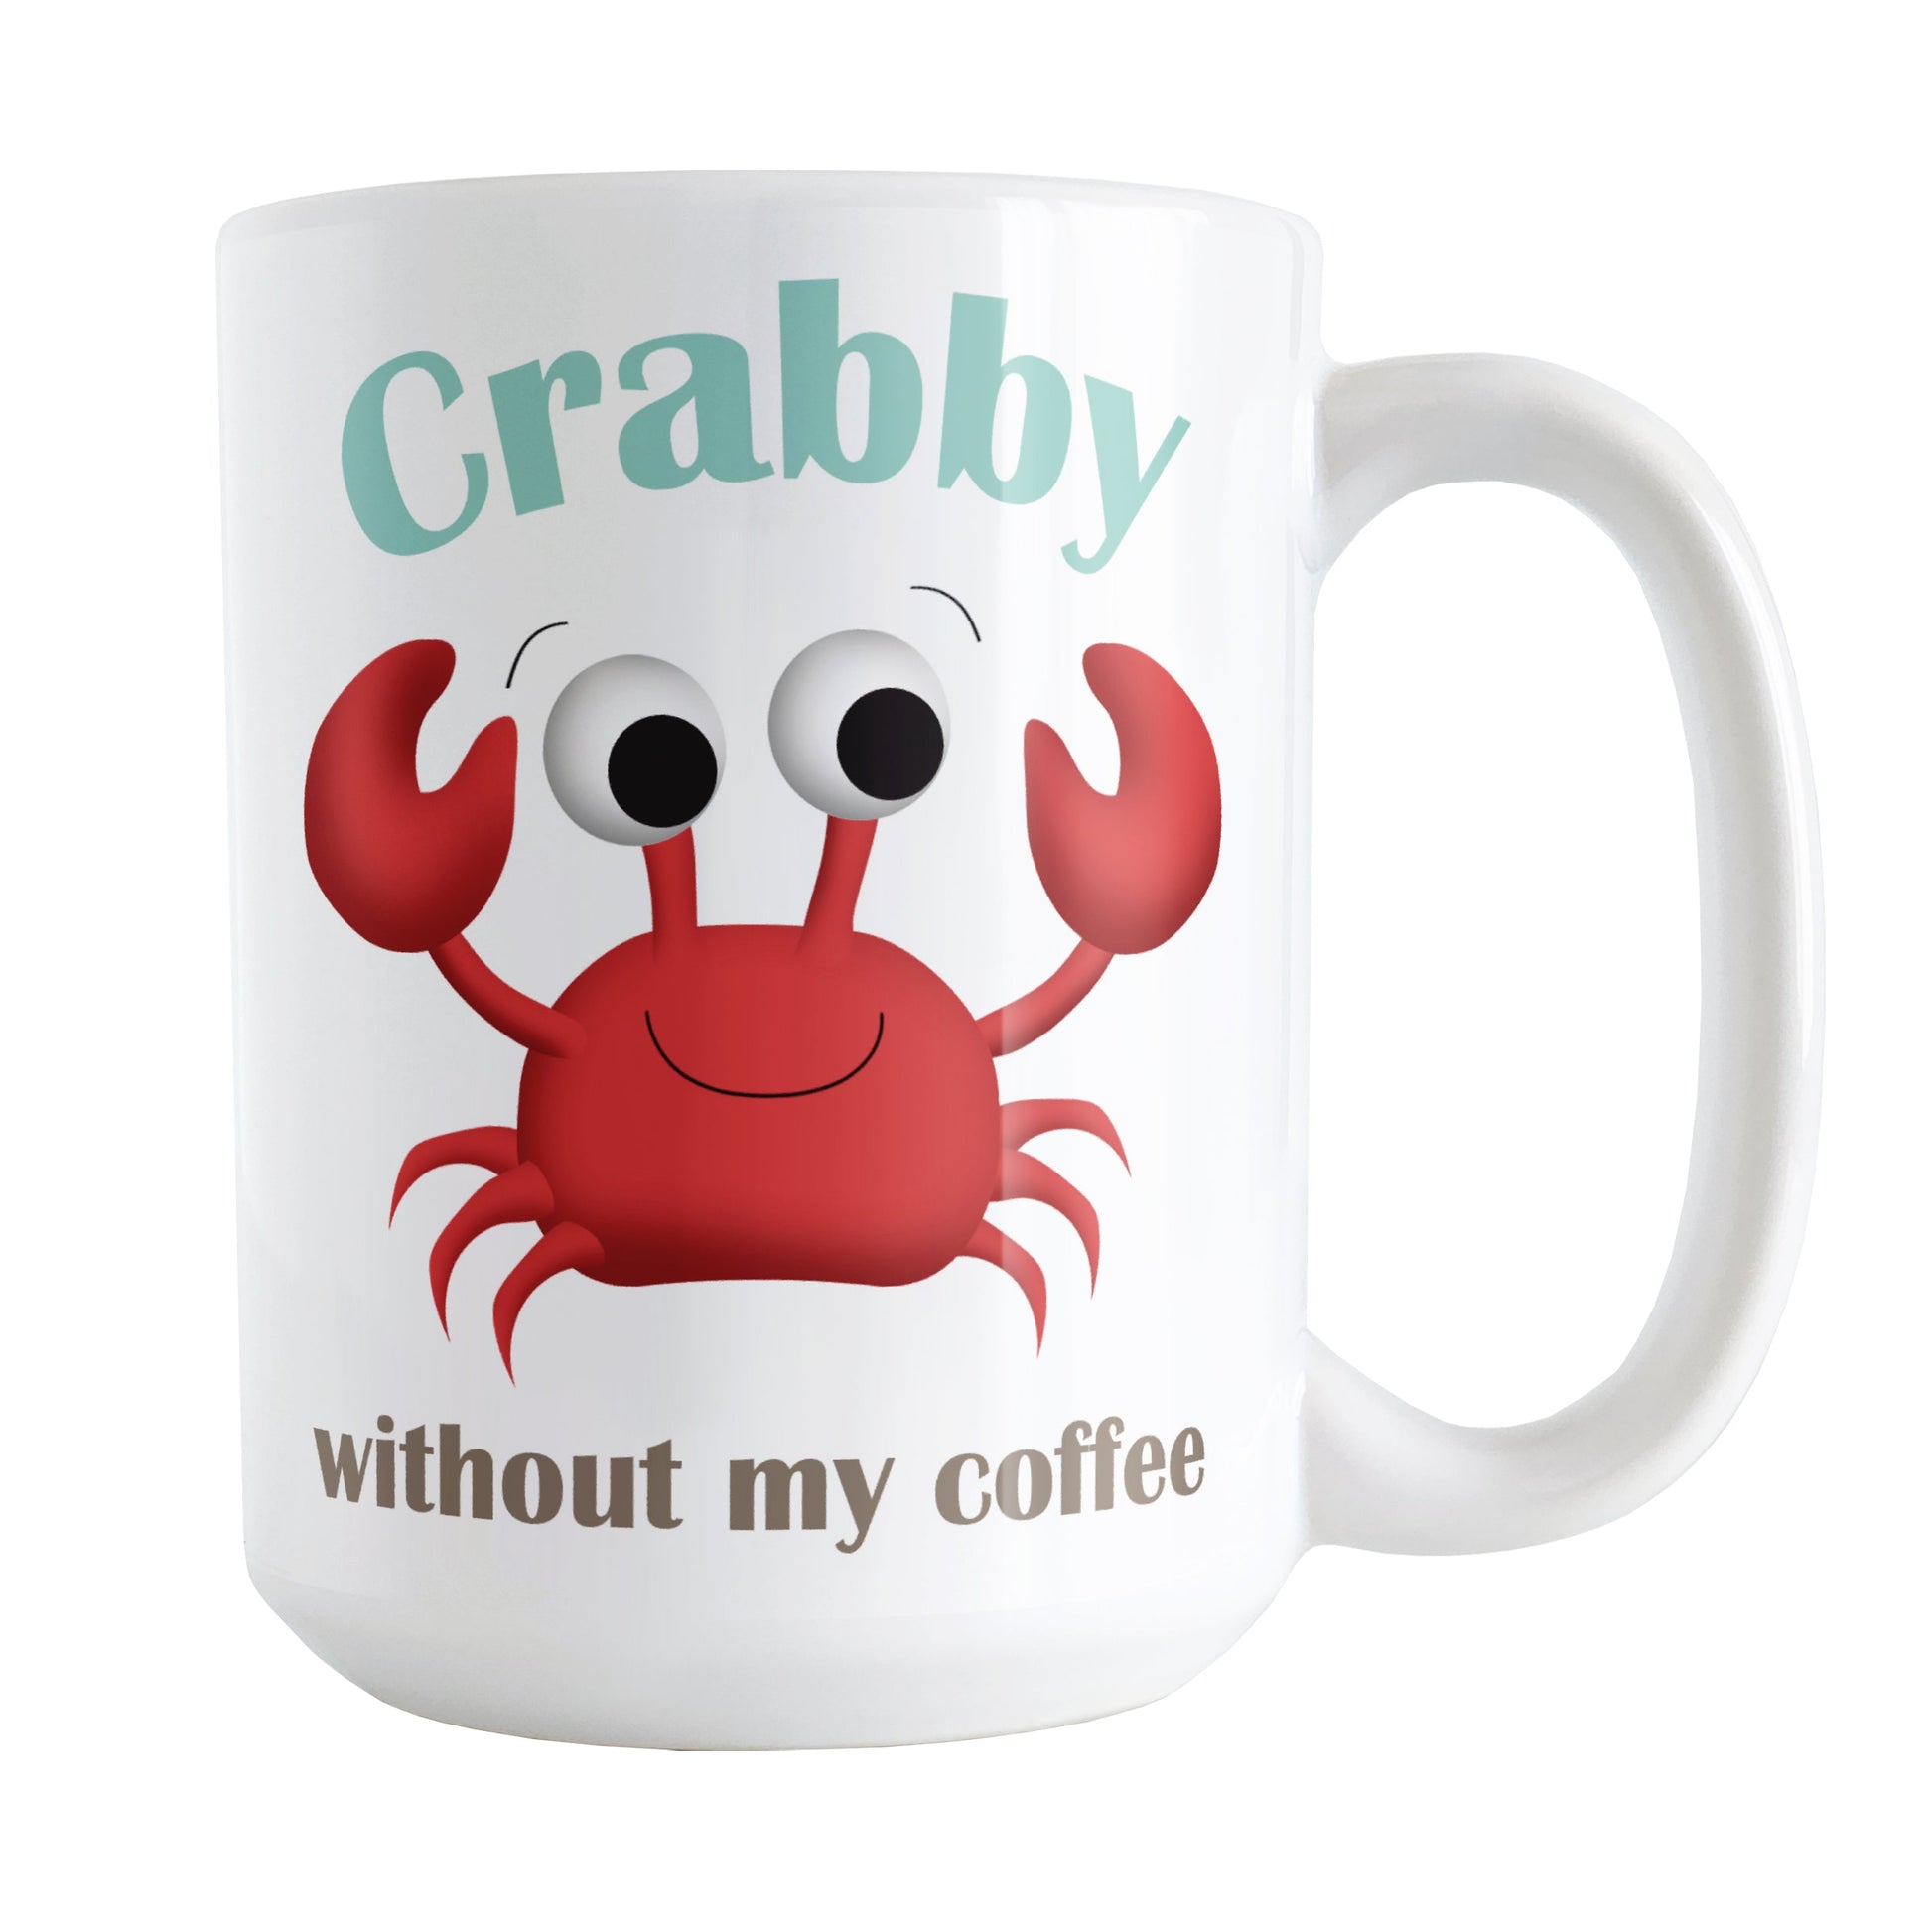 Crabby without my Coffee - Cute Crab Mug (15oz) at Amy's Coffee Mugs